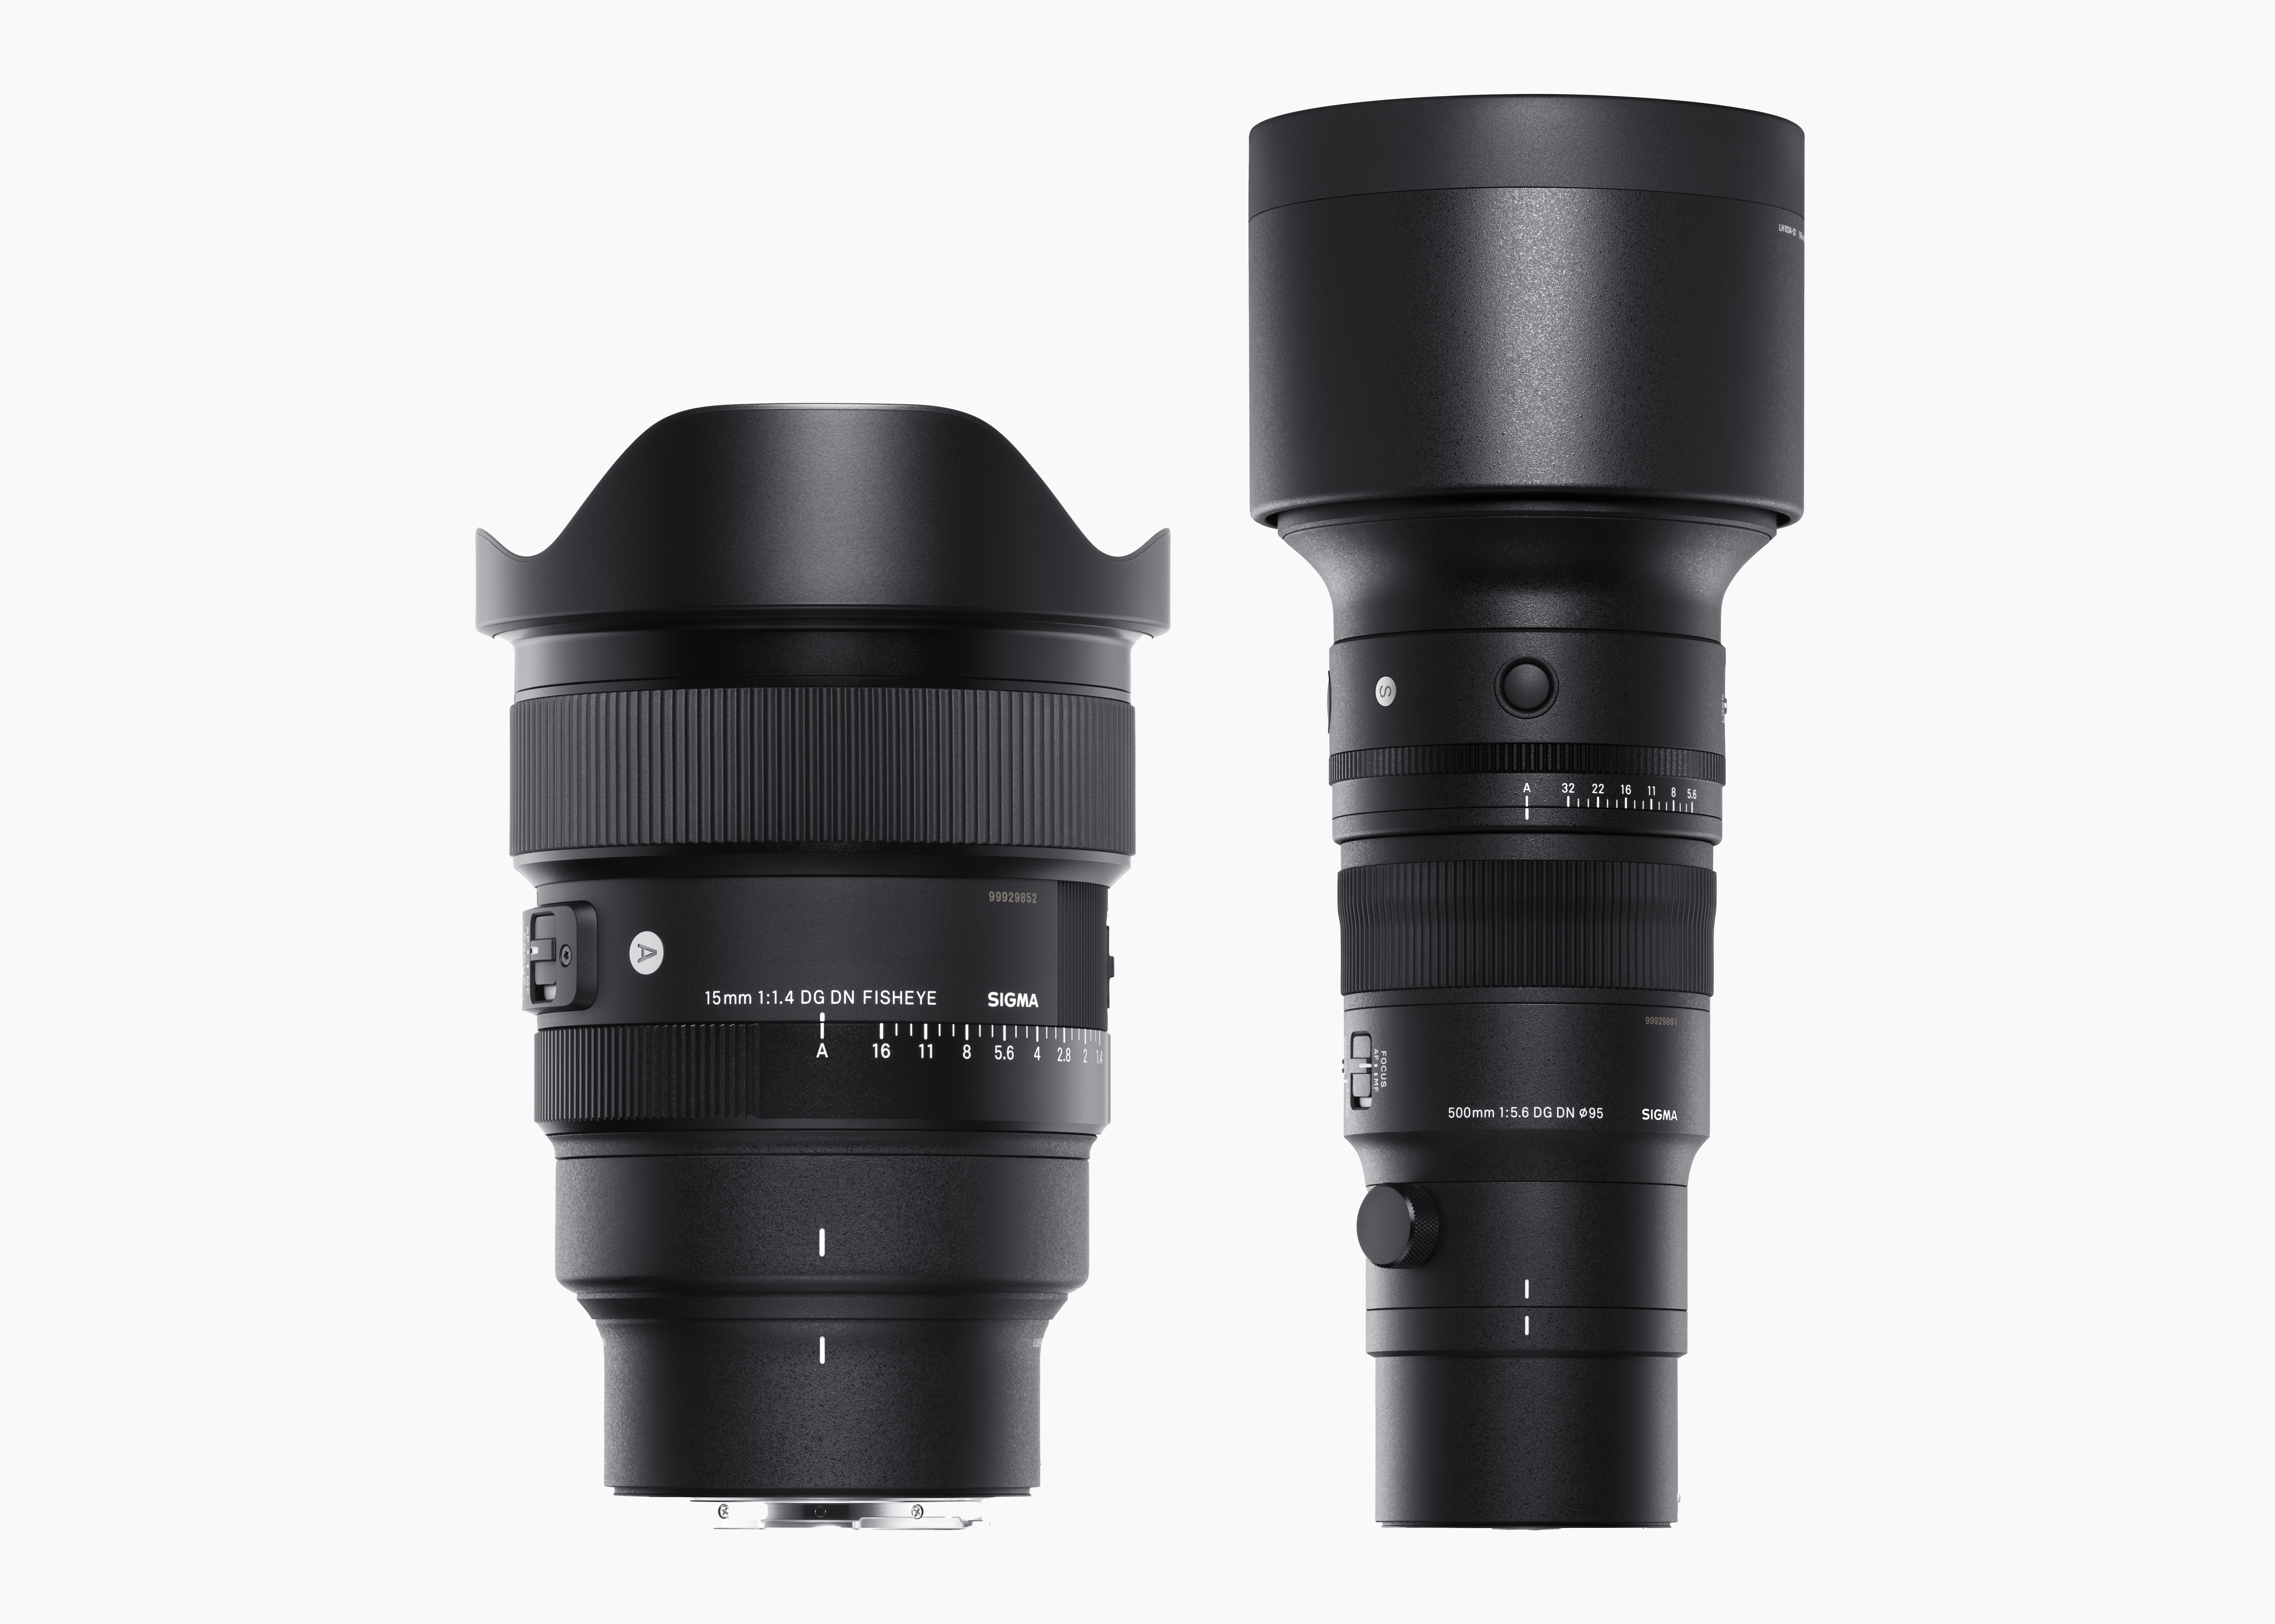 NEW SIGMA 15mm F1.4 DG DN and SIGMA 500mm F5.6 5